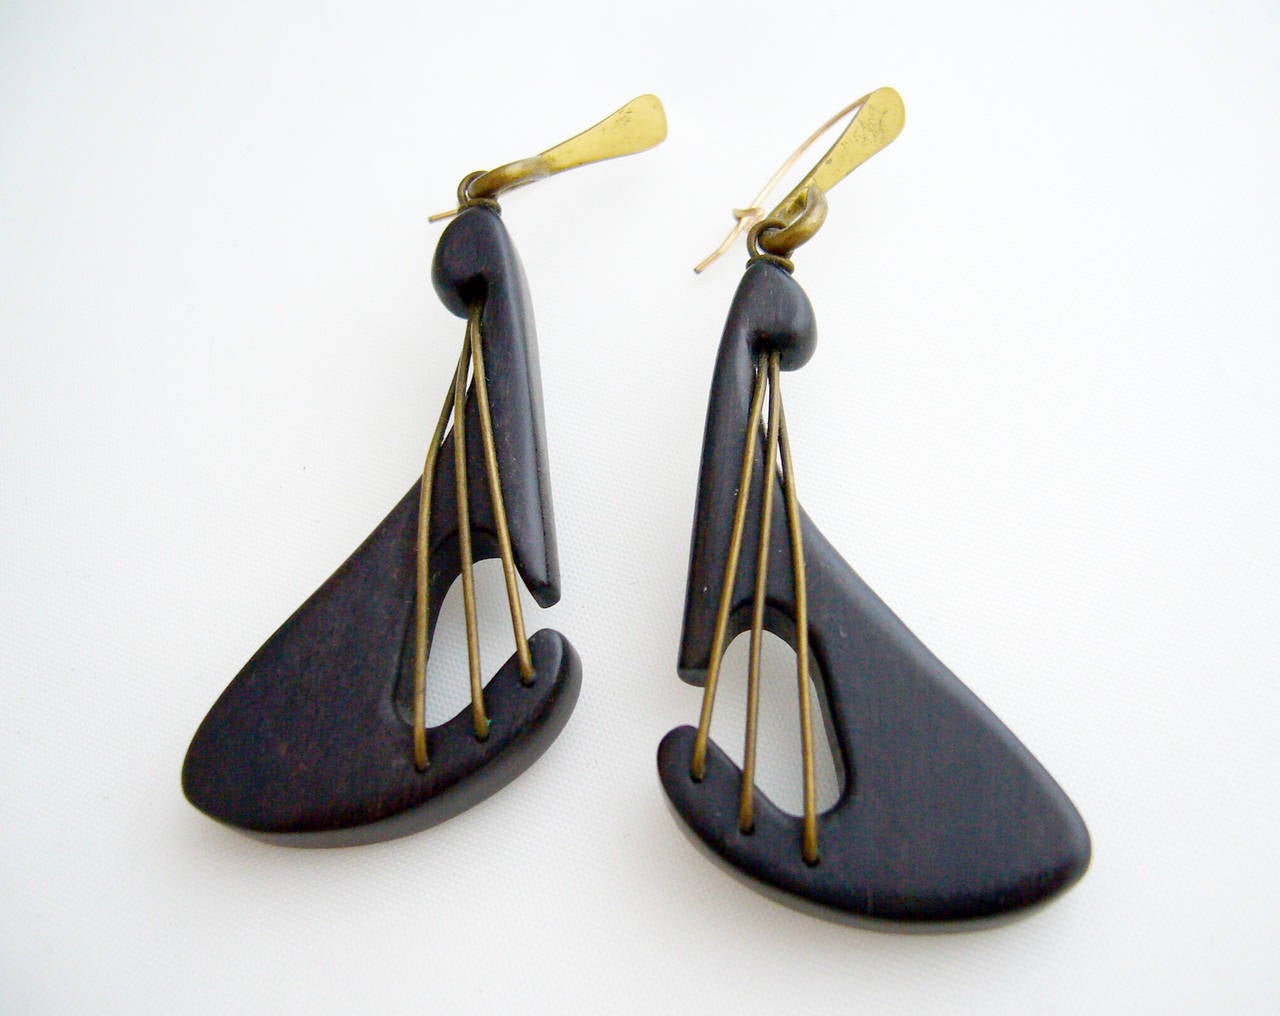 Handmade, one of a kind lute earrings made of carved exotic wood with brass wire 